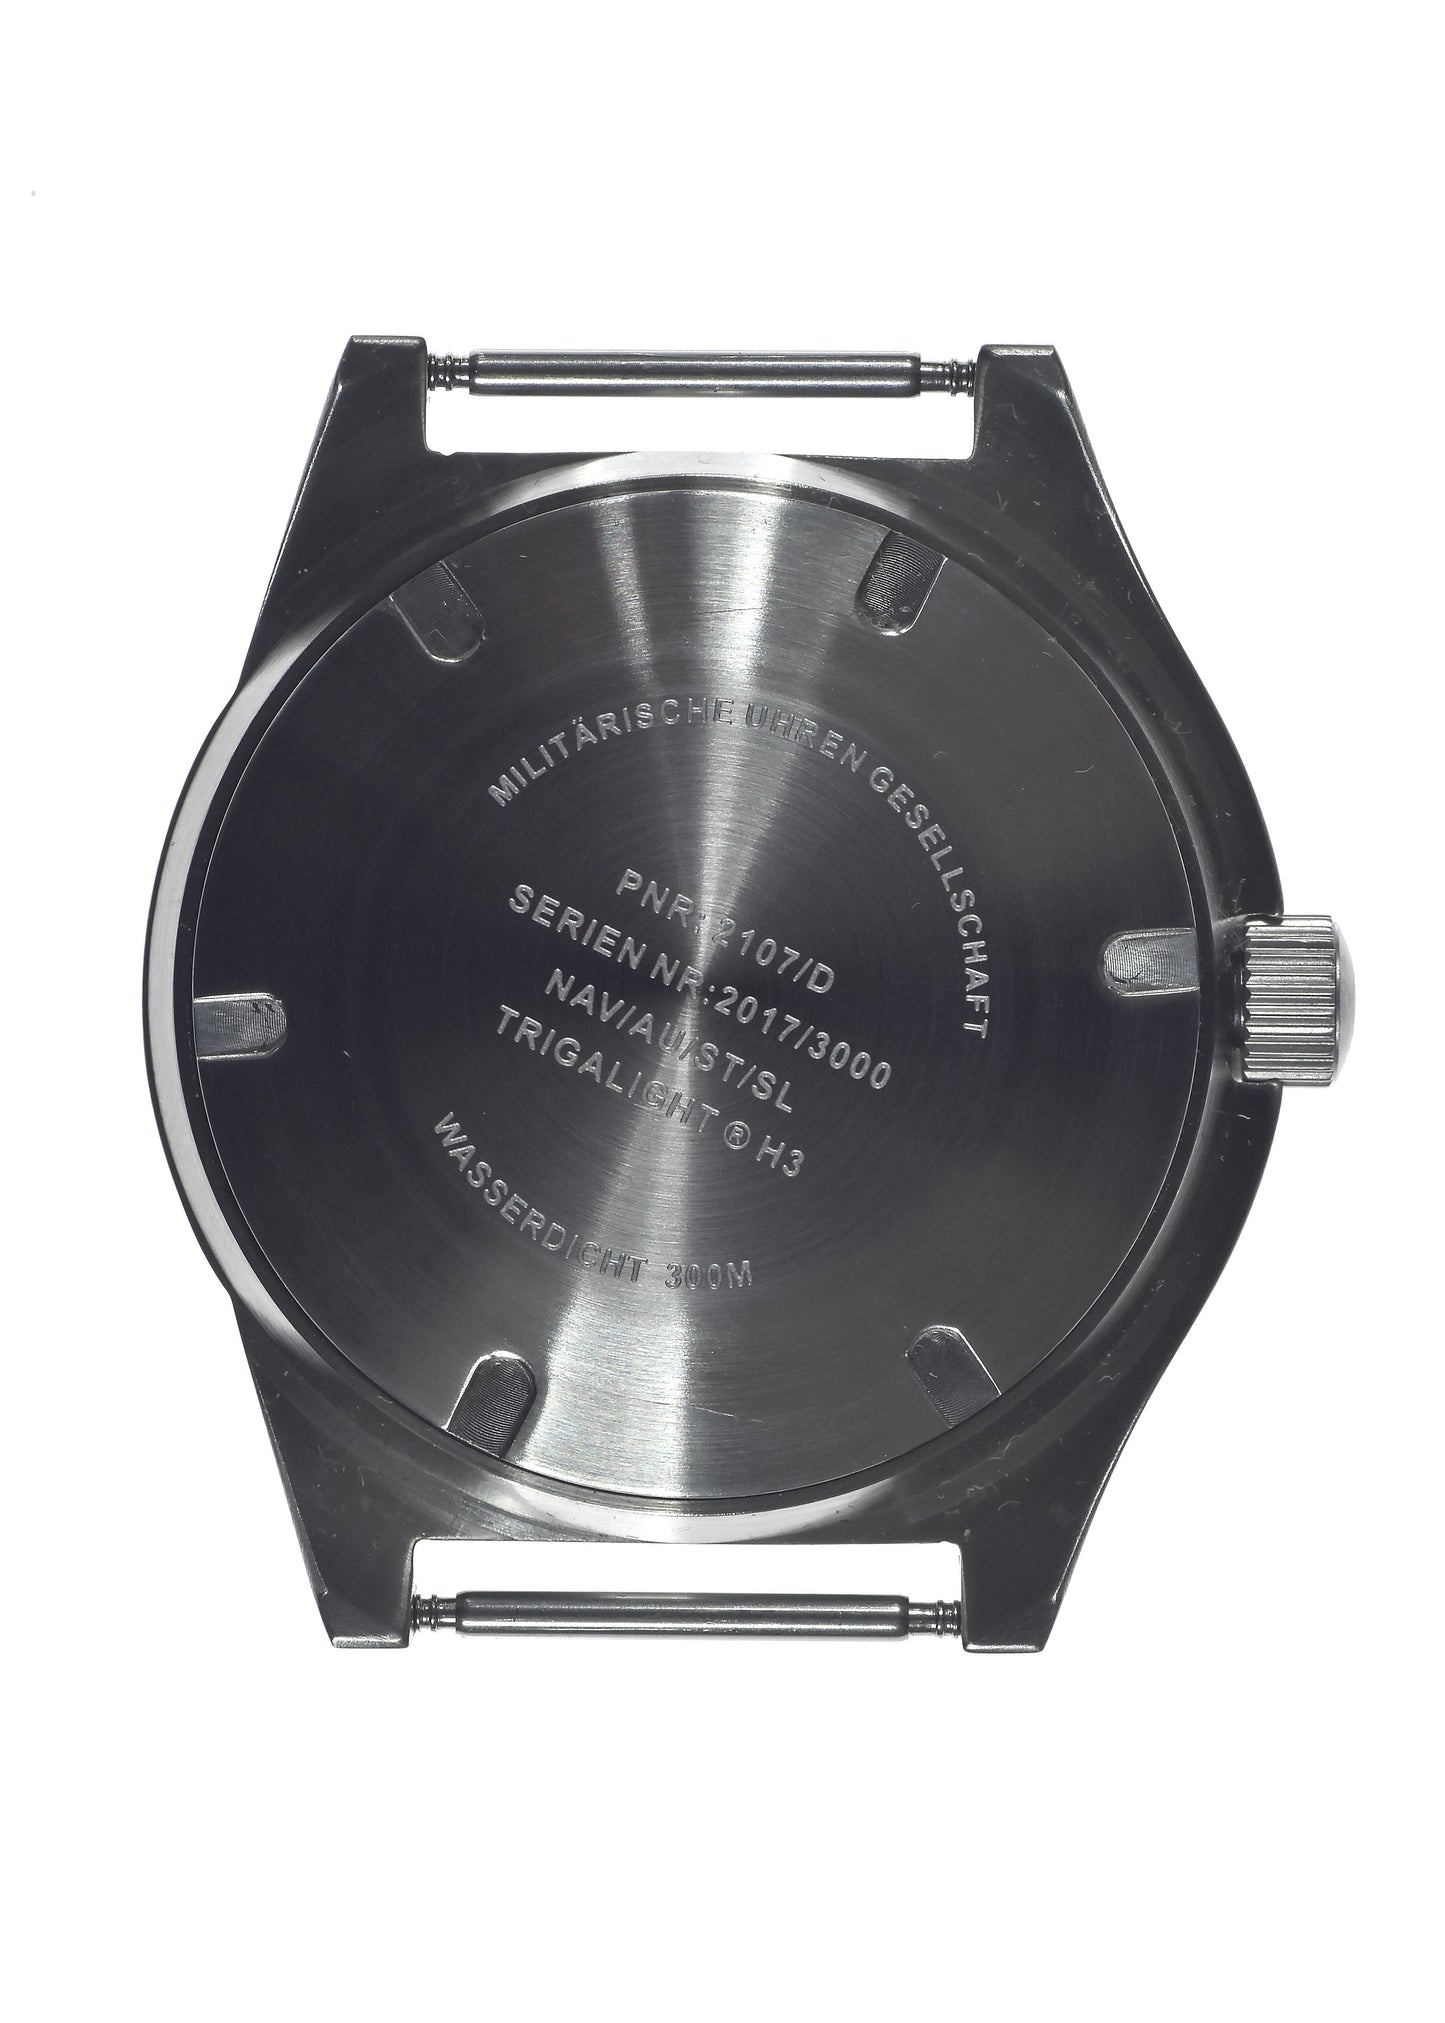 MWC 300m Water Resistant Stainless Steel Tritium GTLS Navigator Watch (Automatic) Sterile Dial